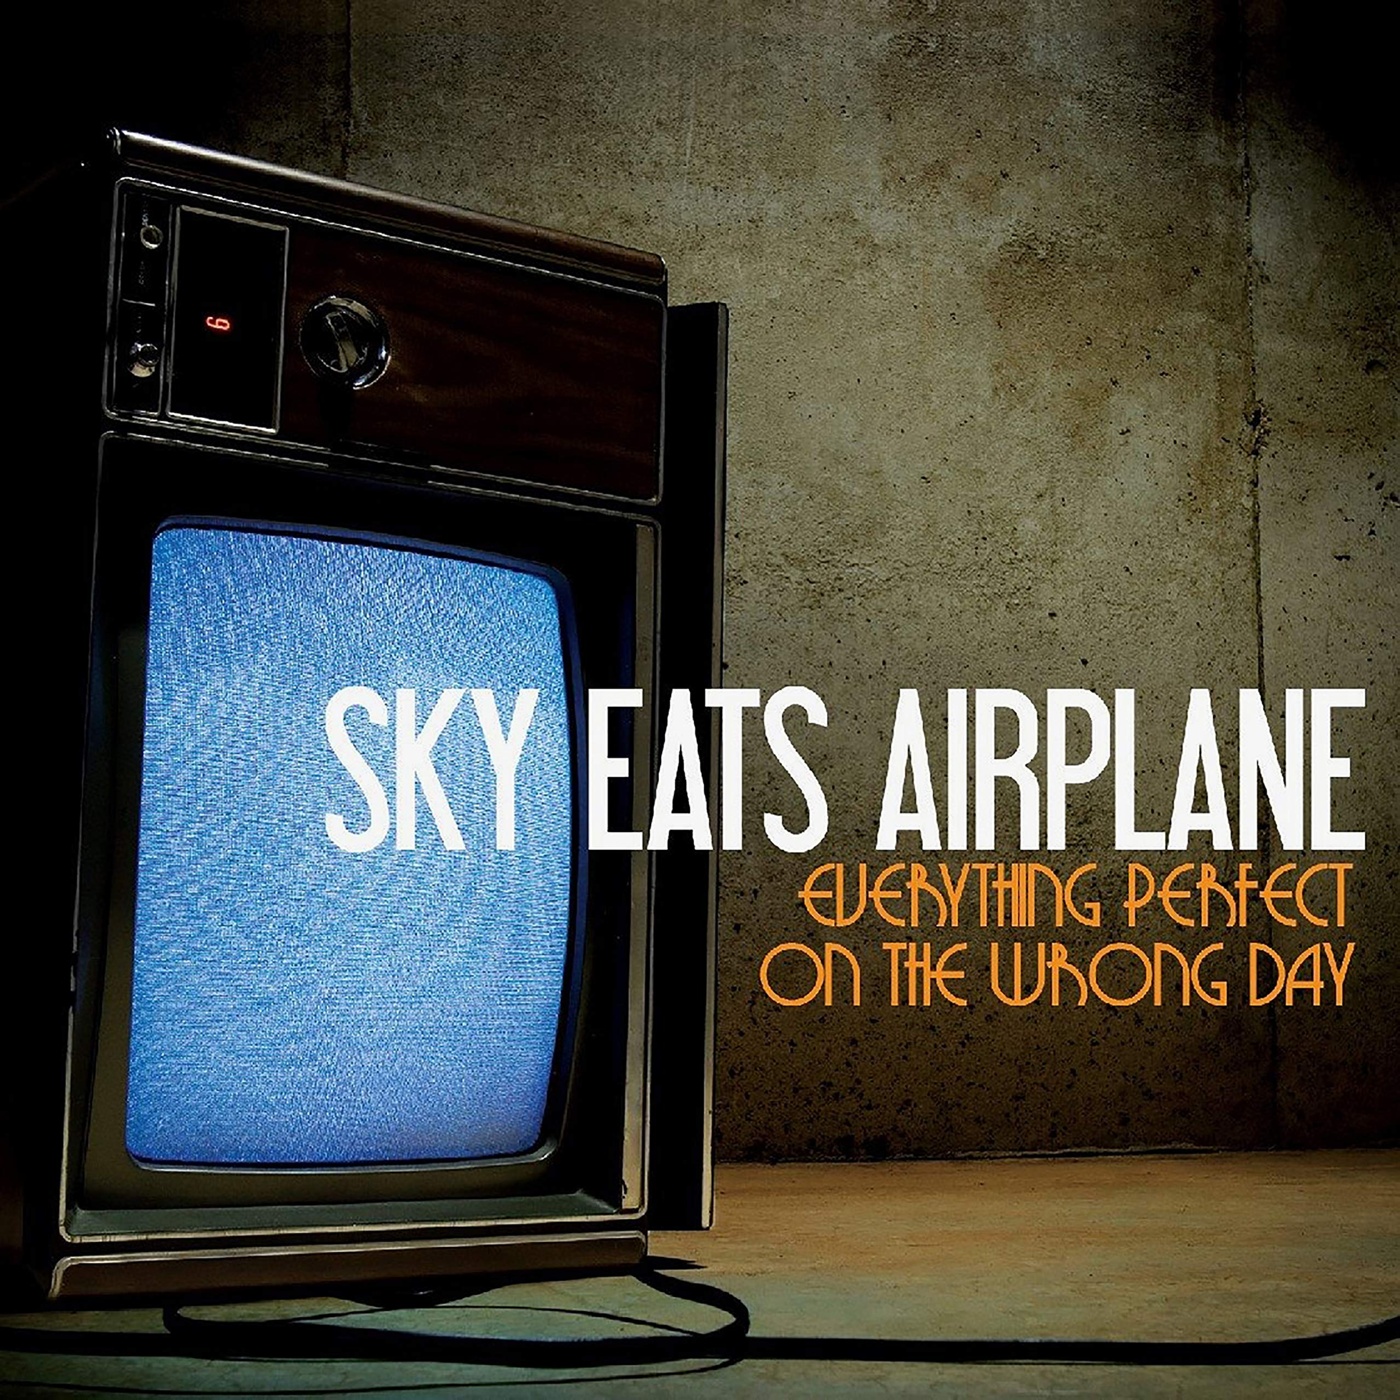 Everything s perfect. Sky eats Airplane - everything perfect on the wrong Day. Moby - everything is wrong. Sky eats Airplane. Everything is perfect the Garden обложка.